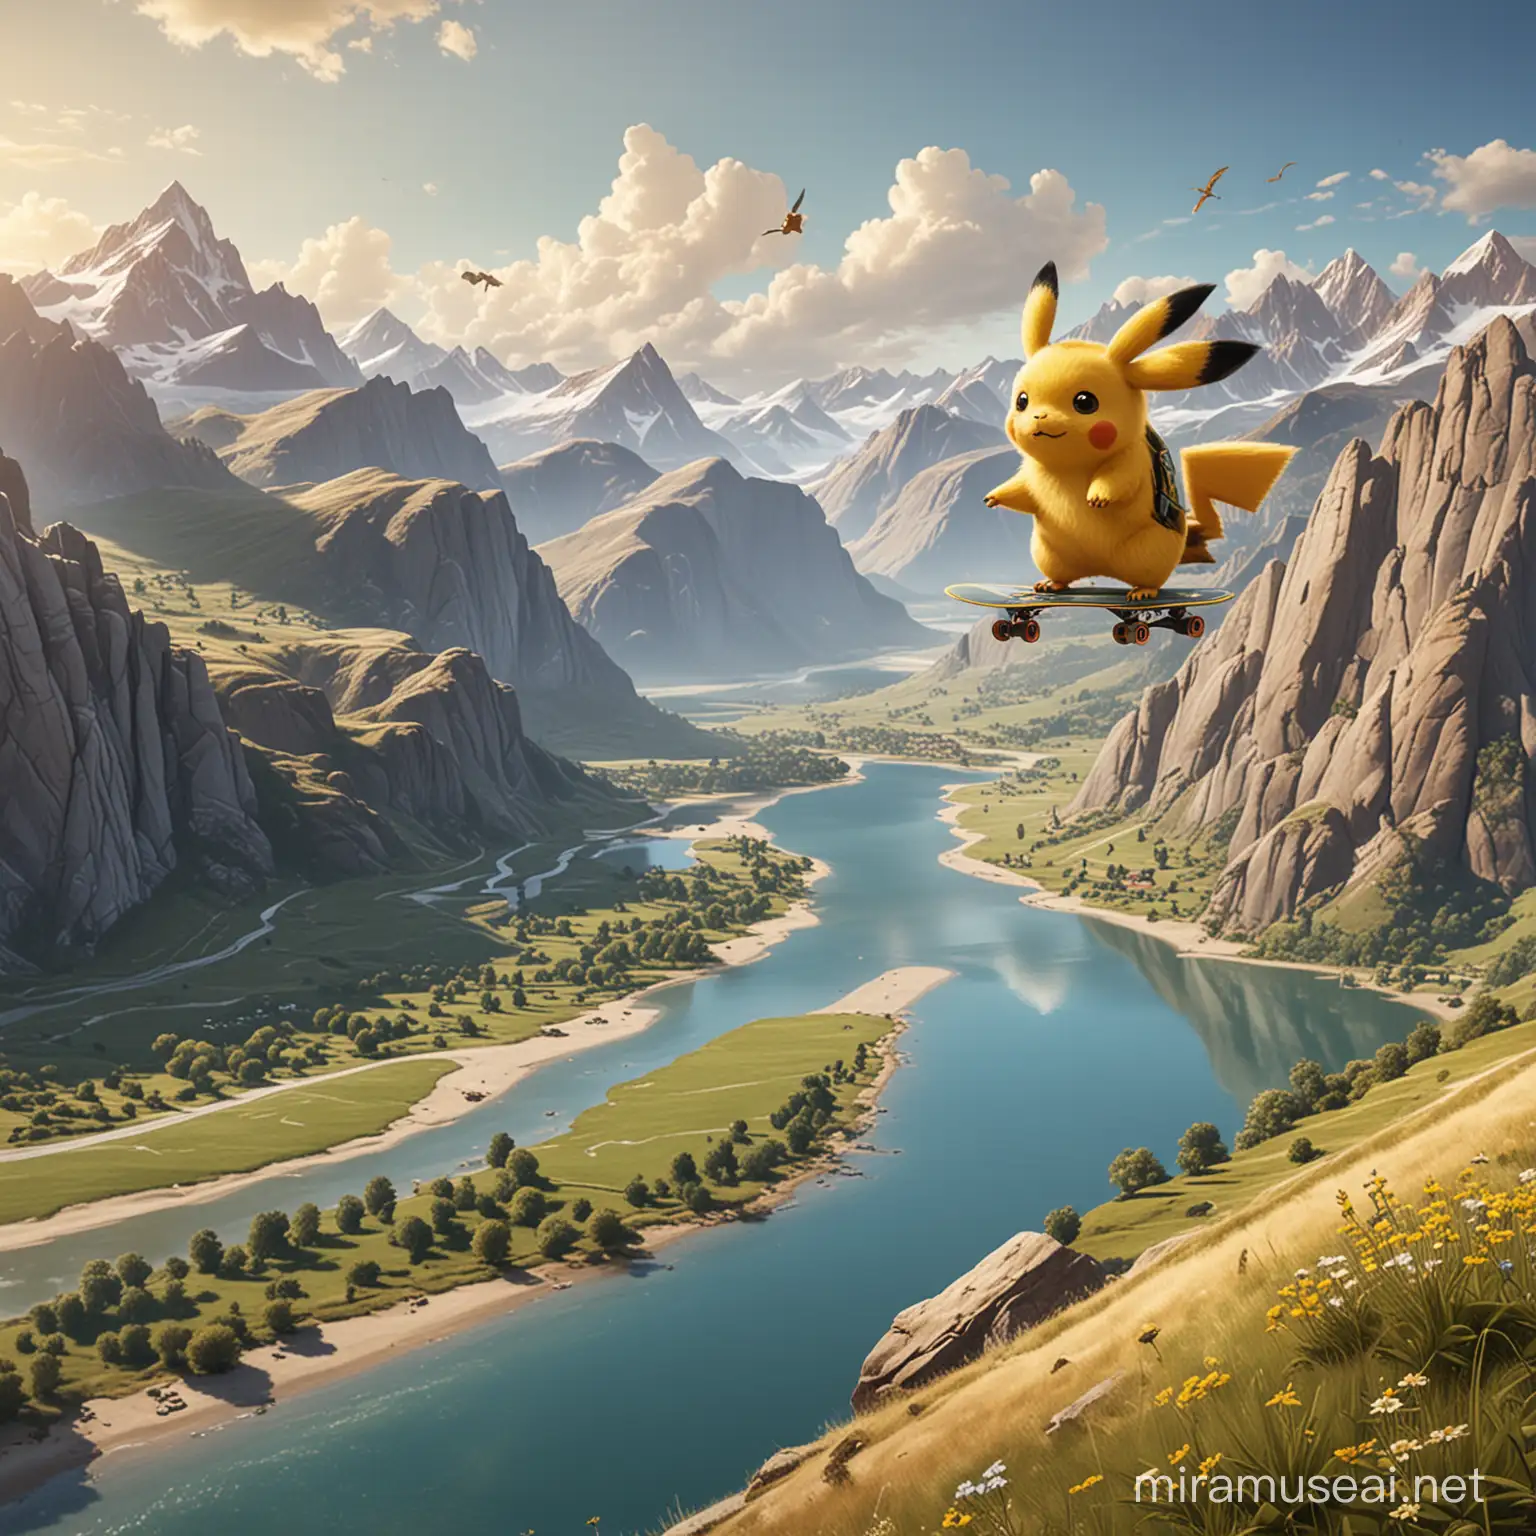  Pikacu flies over the landscape with mountains, hills and lakes on a flying skateboard.